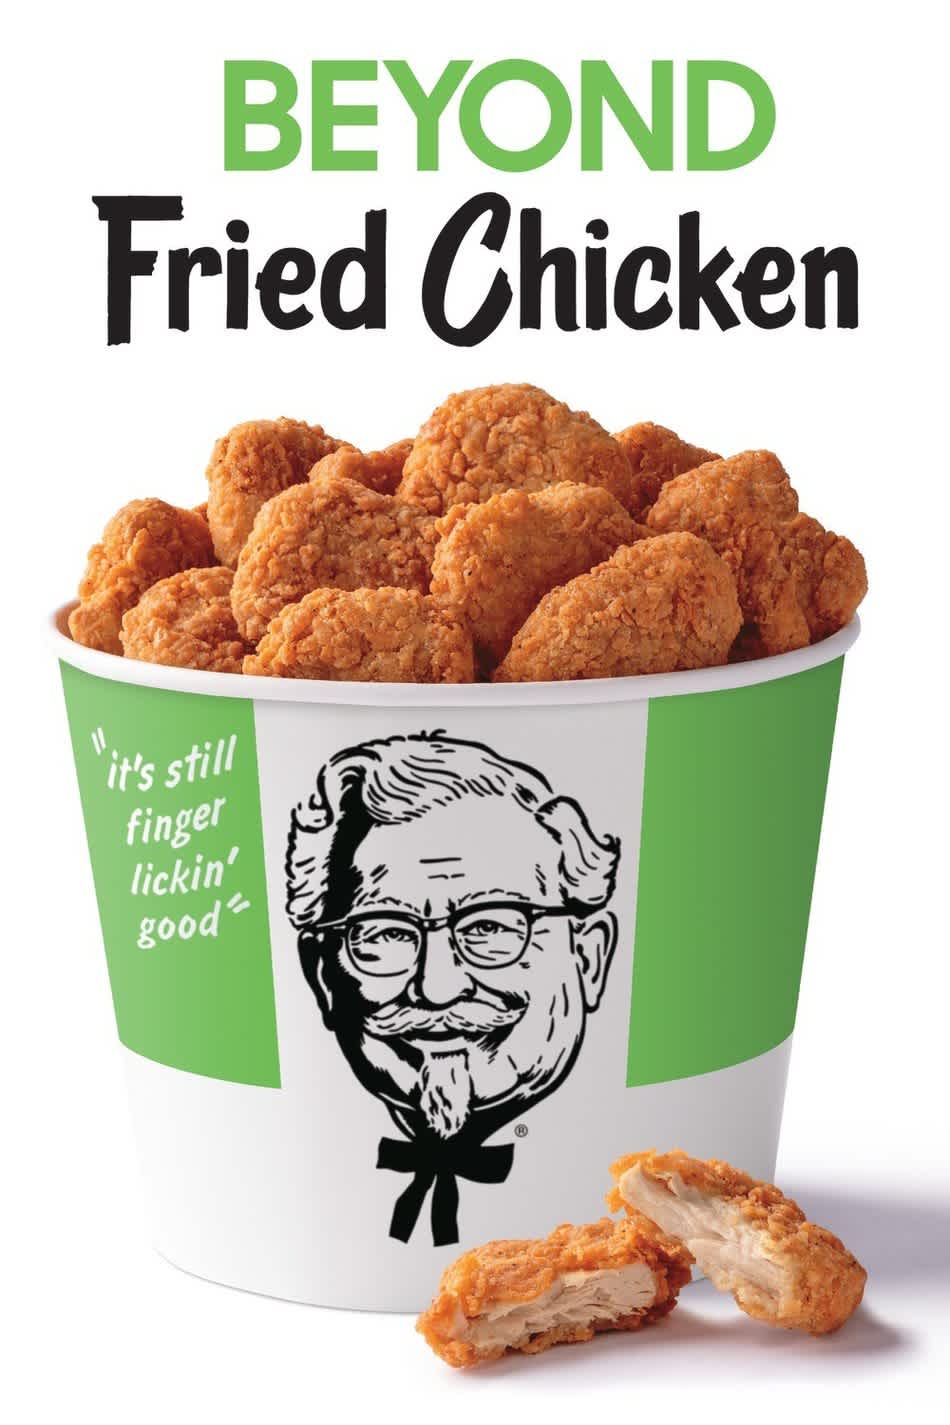 KFC BEYOND FRIED CHICKEN™ EXPANDS TO TWO NEW MARKETS